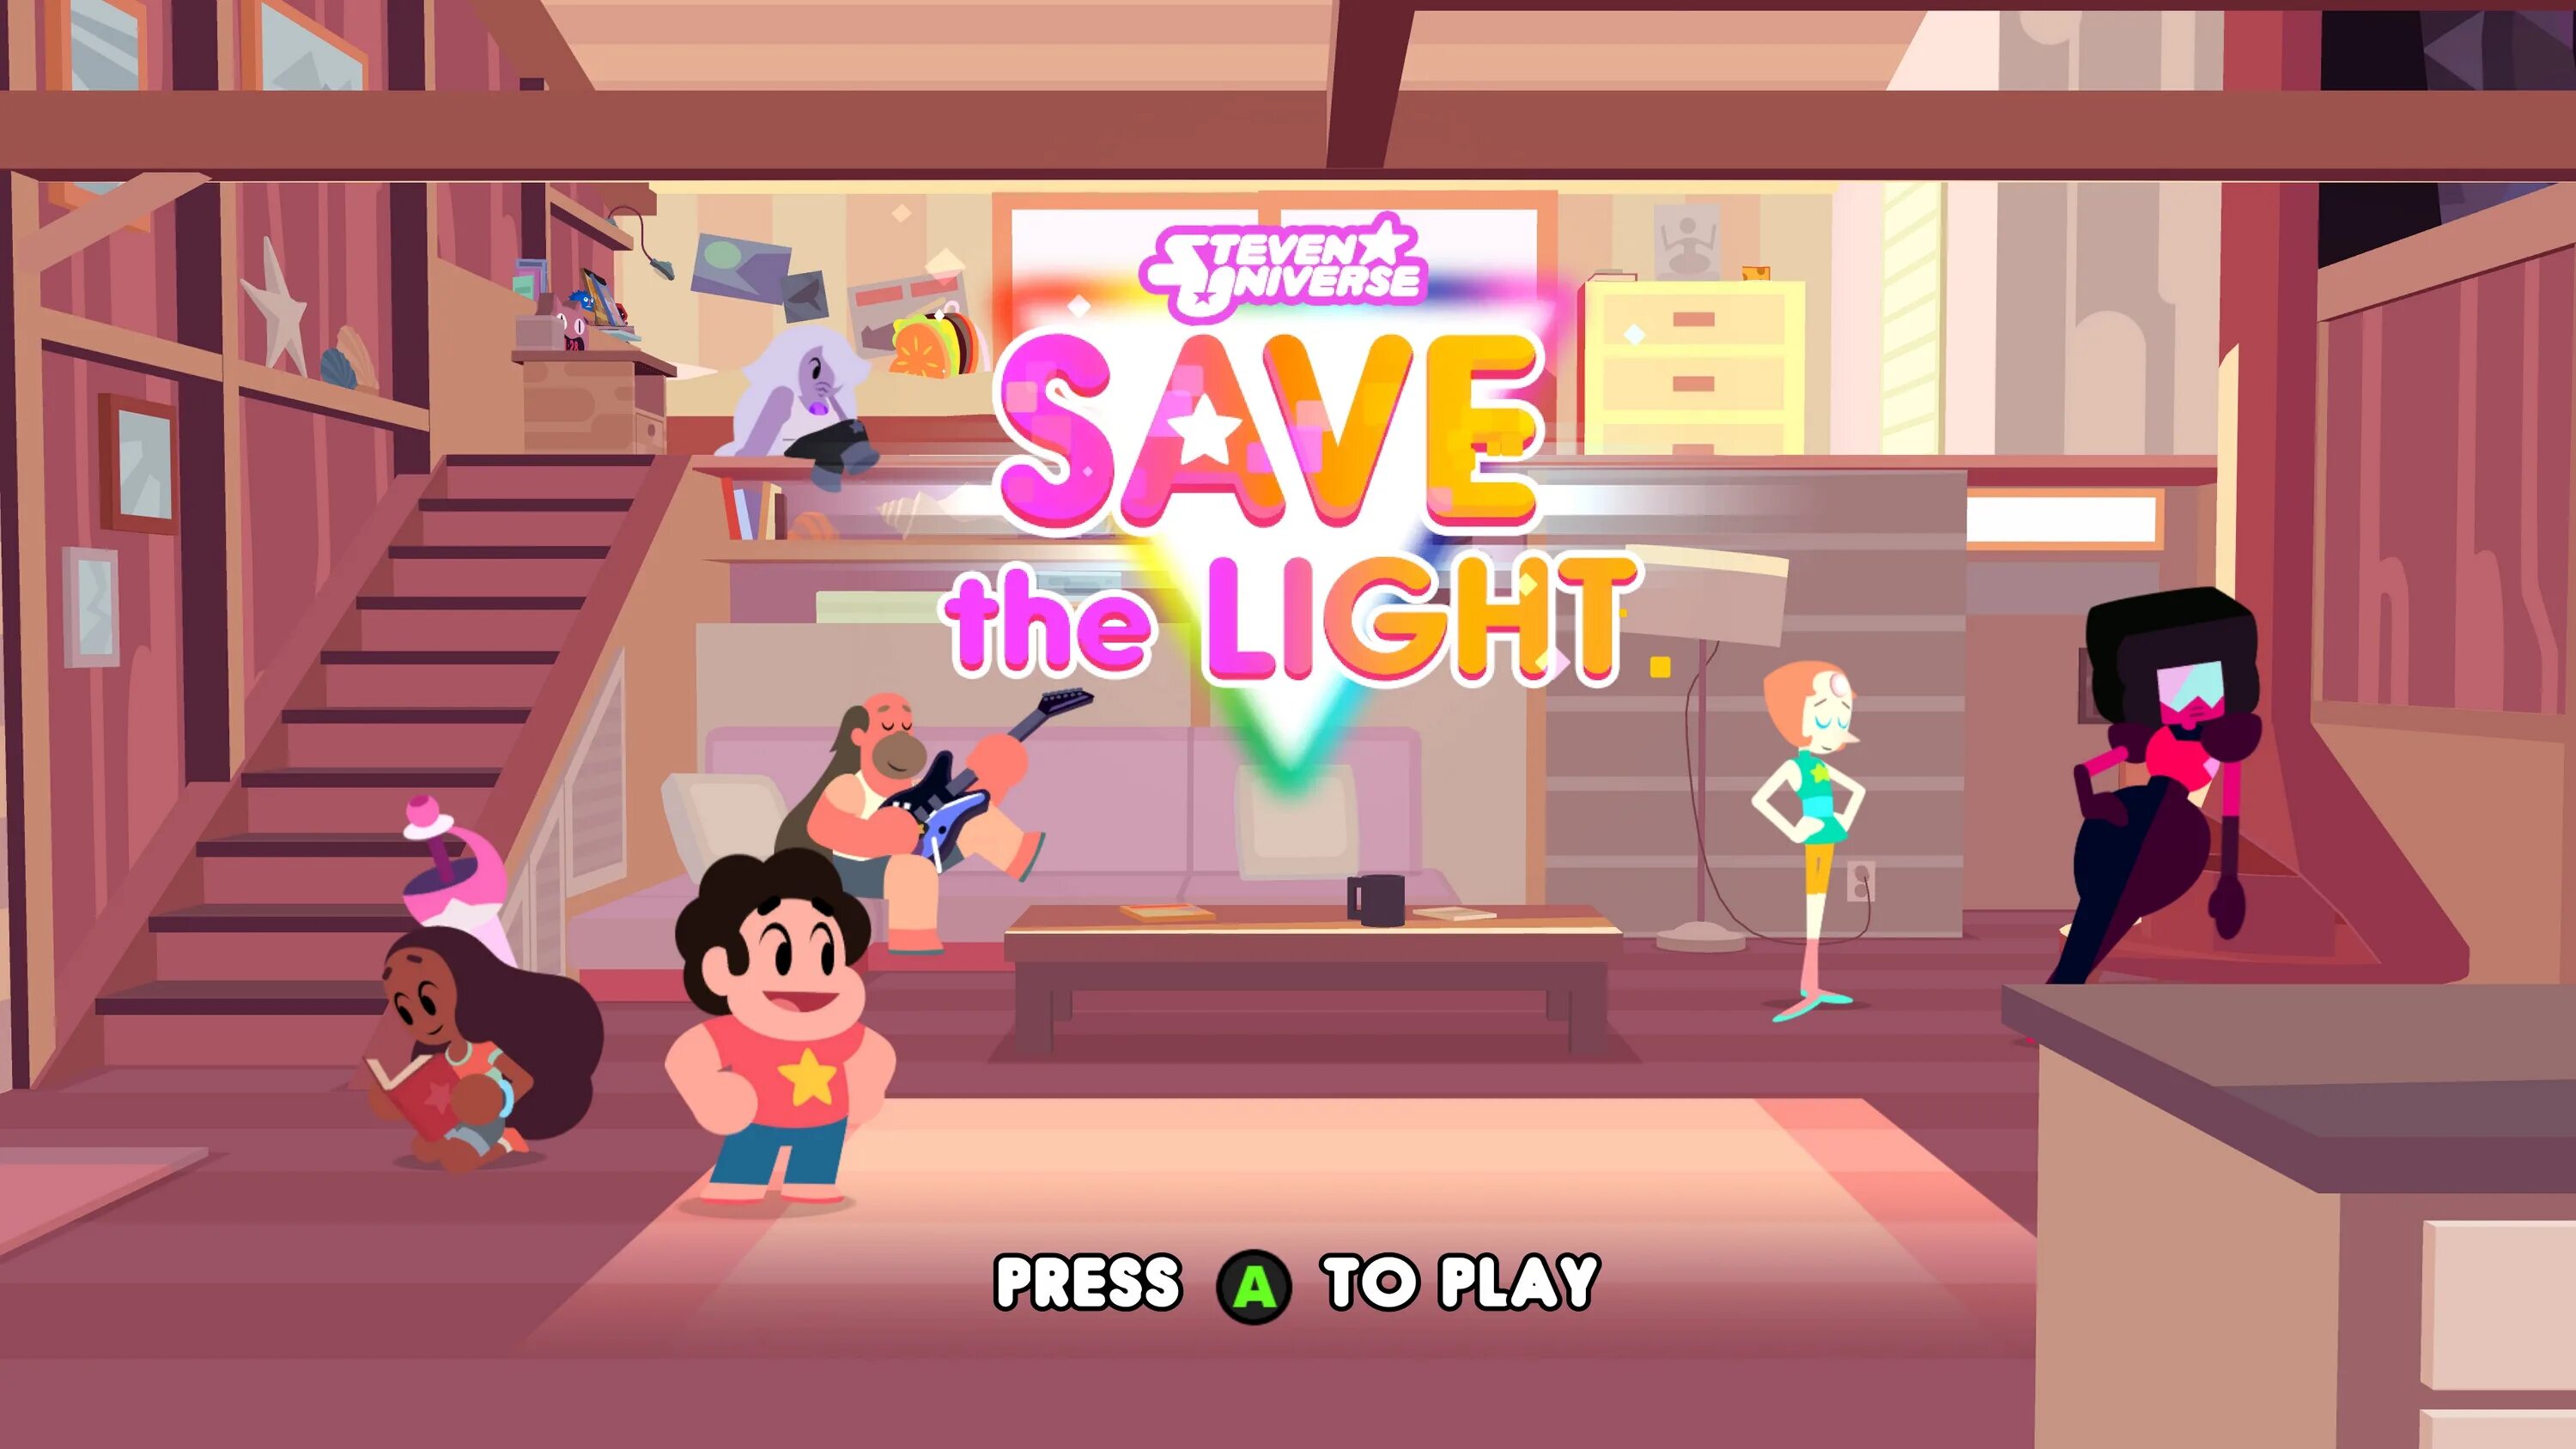 Save the Light. Steven save the Light. Спасти свет игра. Save the universe